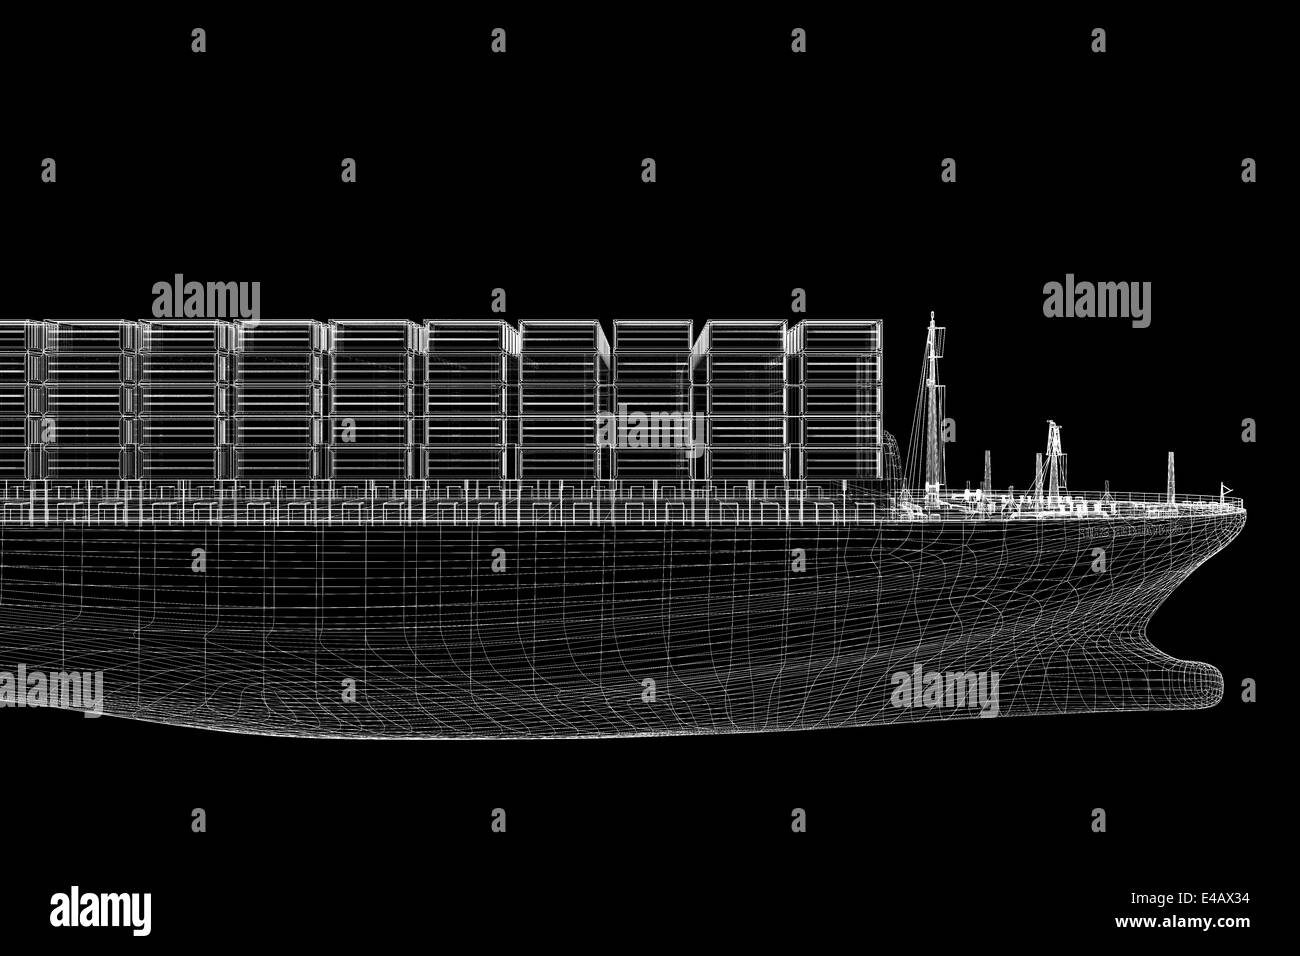 Container Ship Cargo 3D model body structure, wire model Stock Photo